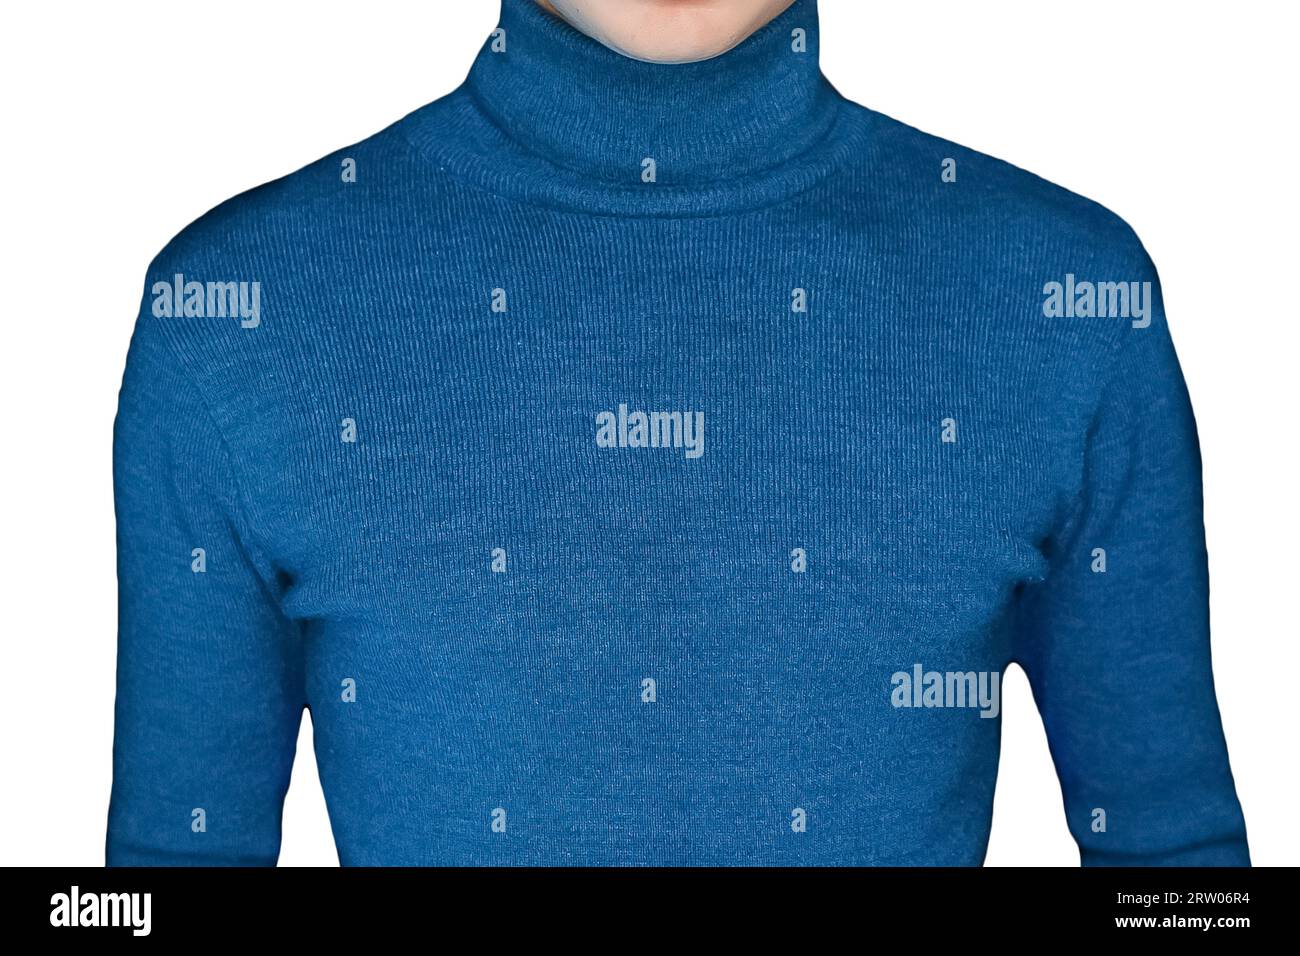 Skinny guy in blue turtleneck men's style of clothing on the white isolated background, close up. Stock Photo